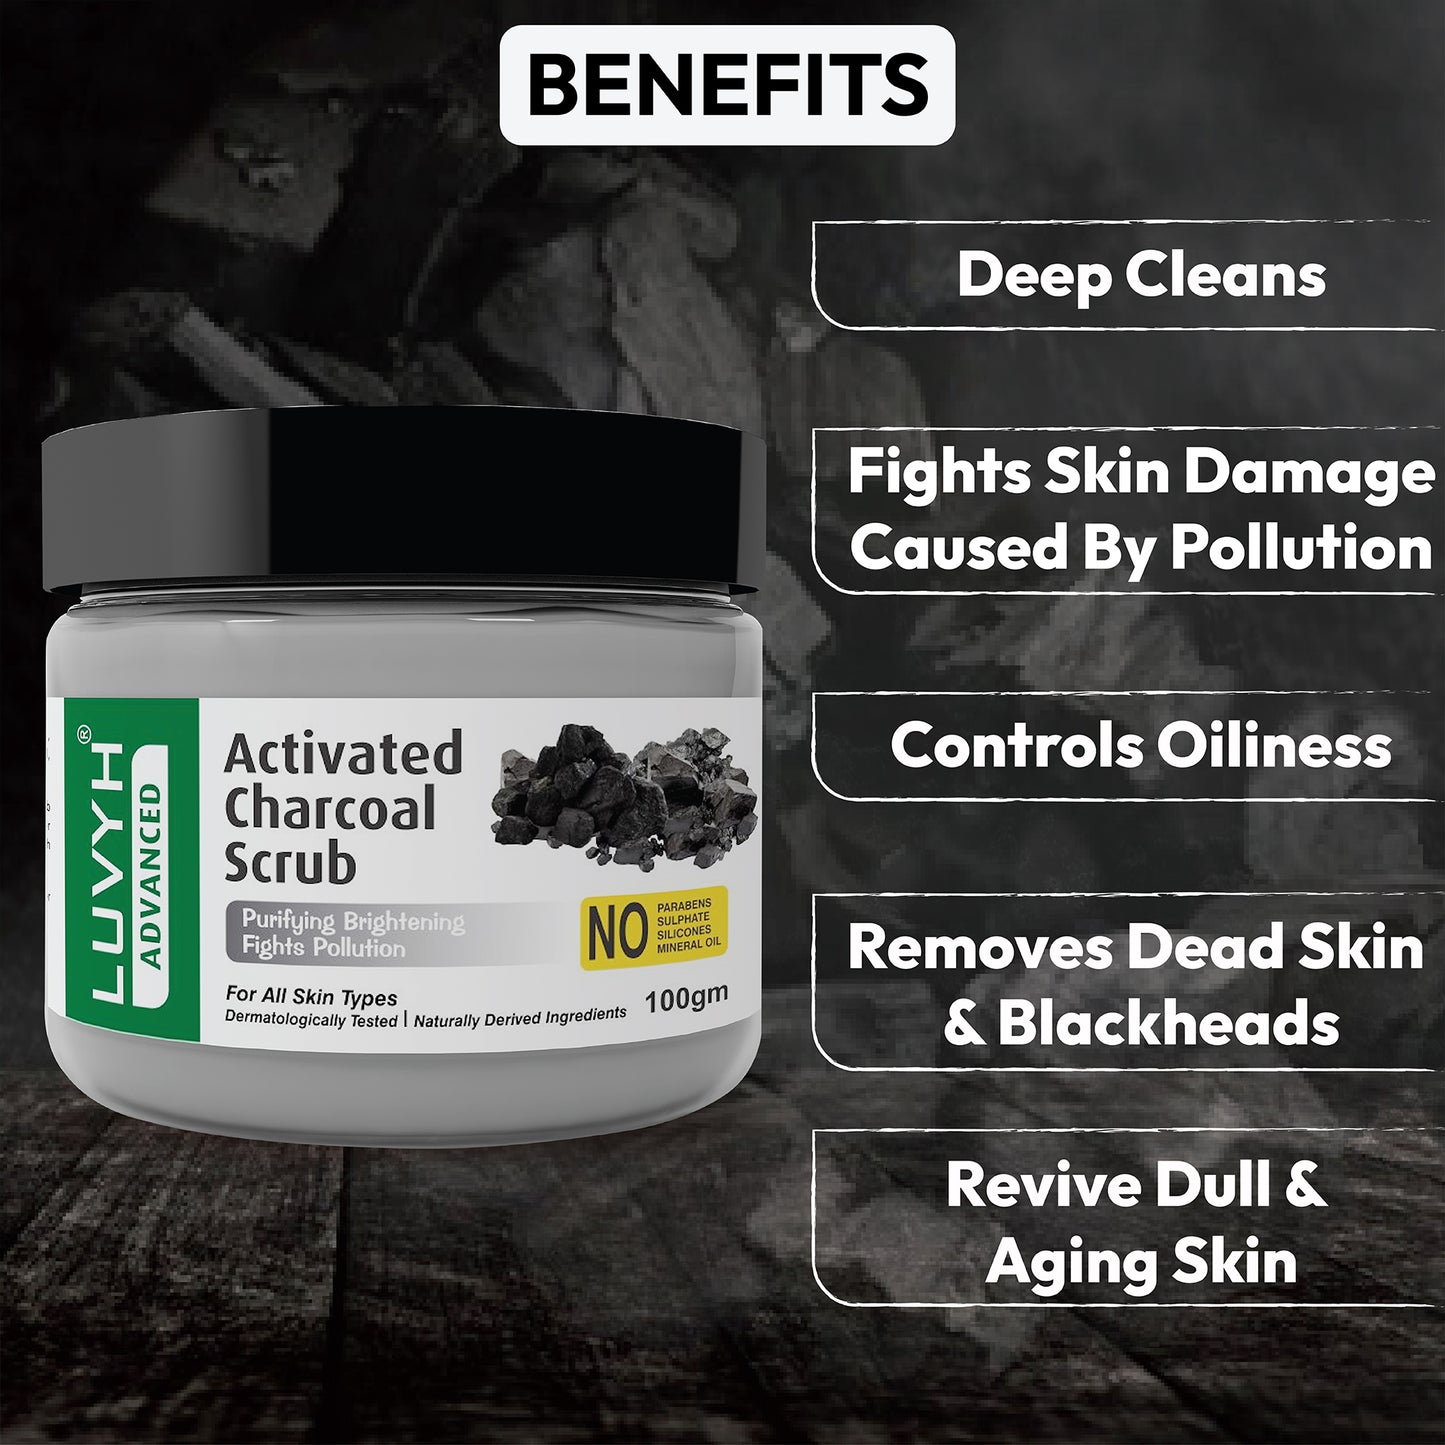 Benefits of Activated Charcoal Scrub